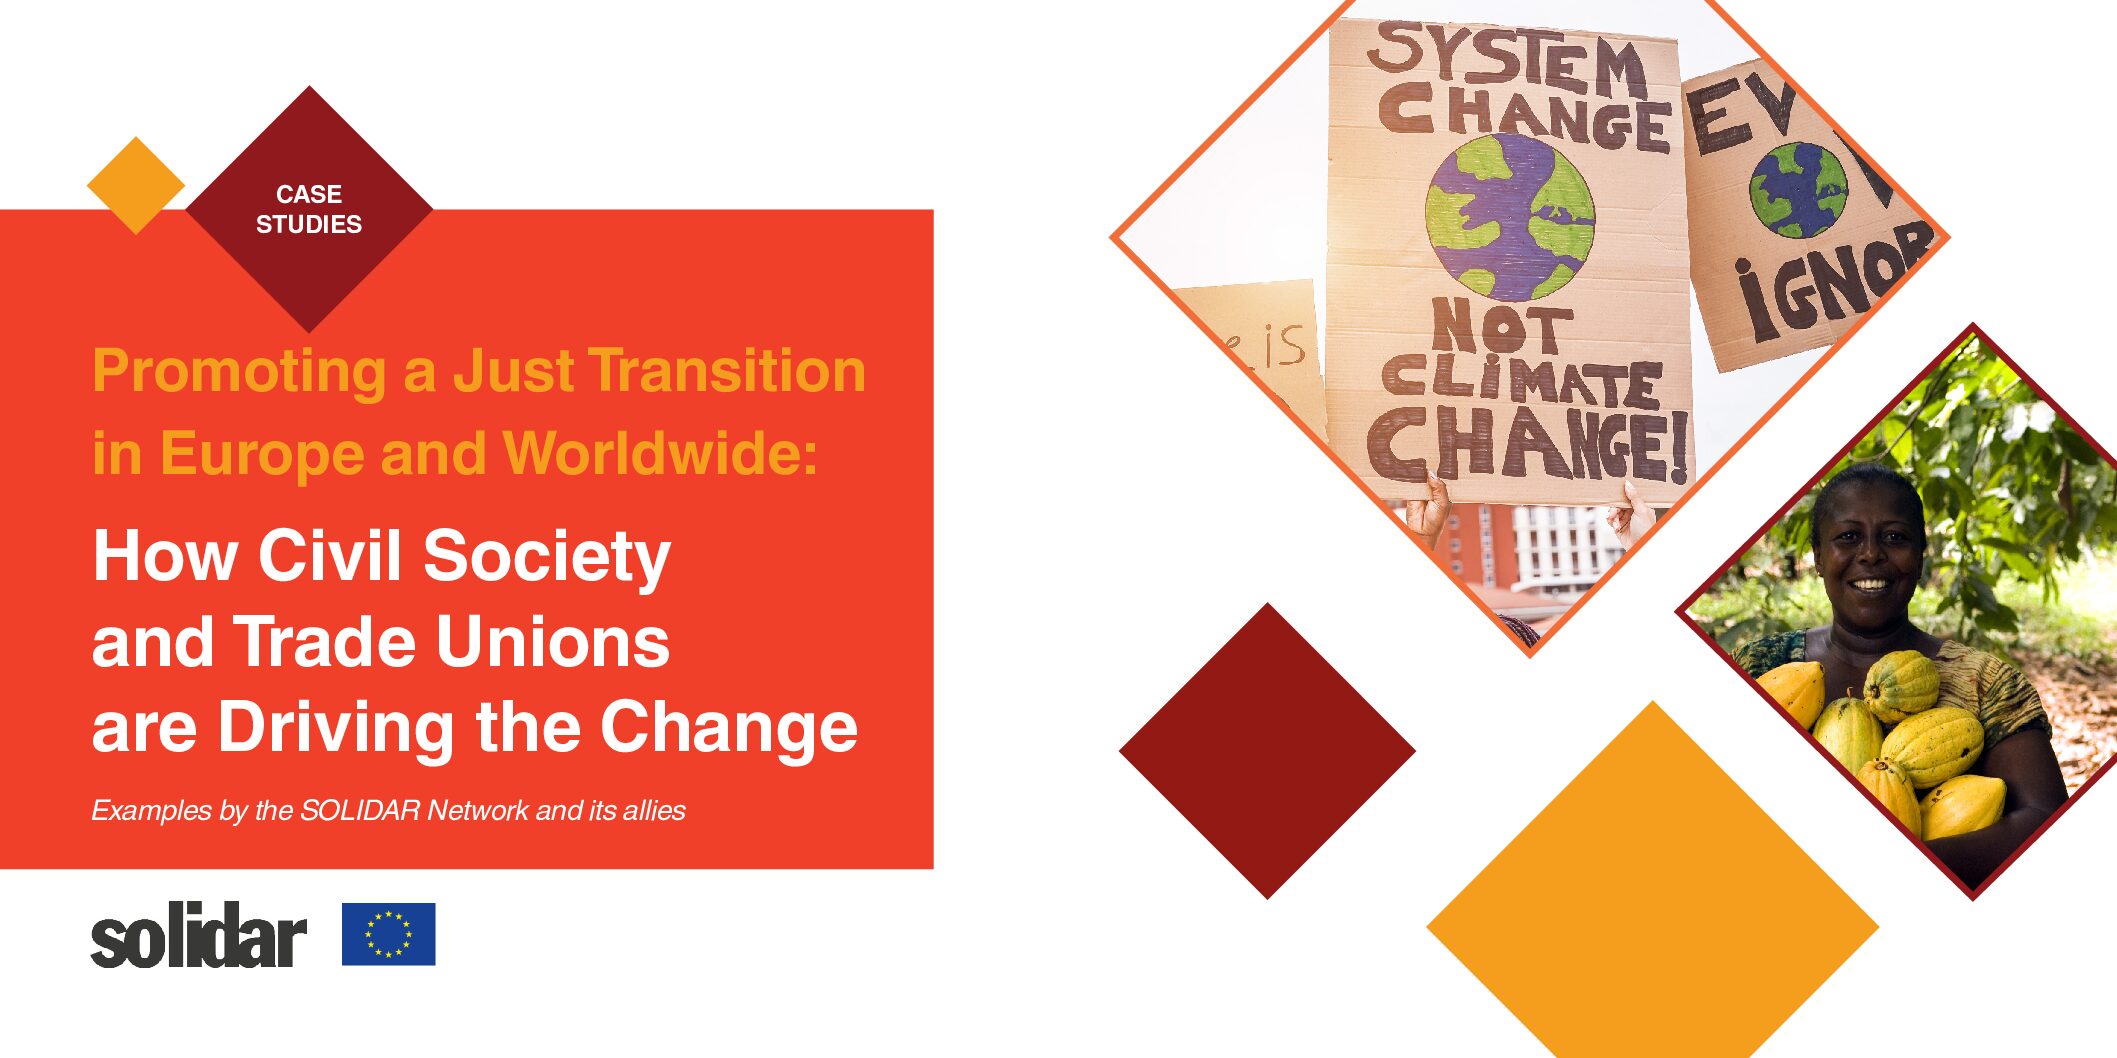 Promoting a Just Transition in Europe and Worldwide: How Civil Society and Trade Unions are Driving the Change